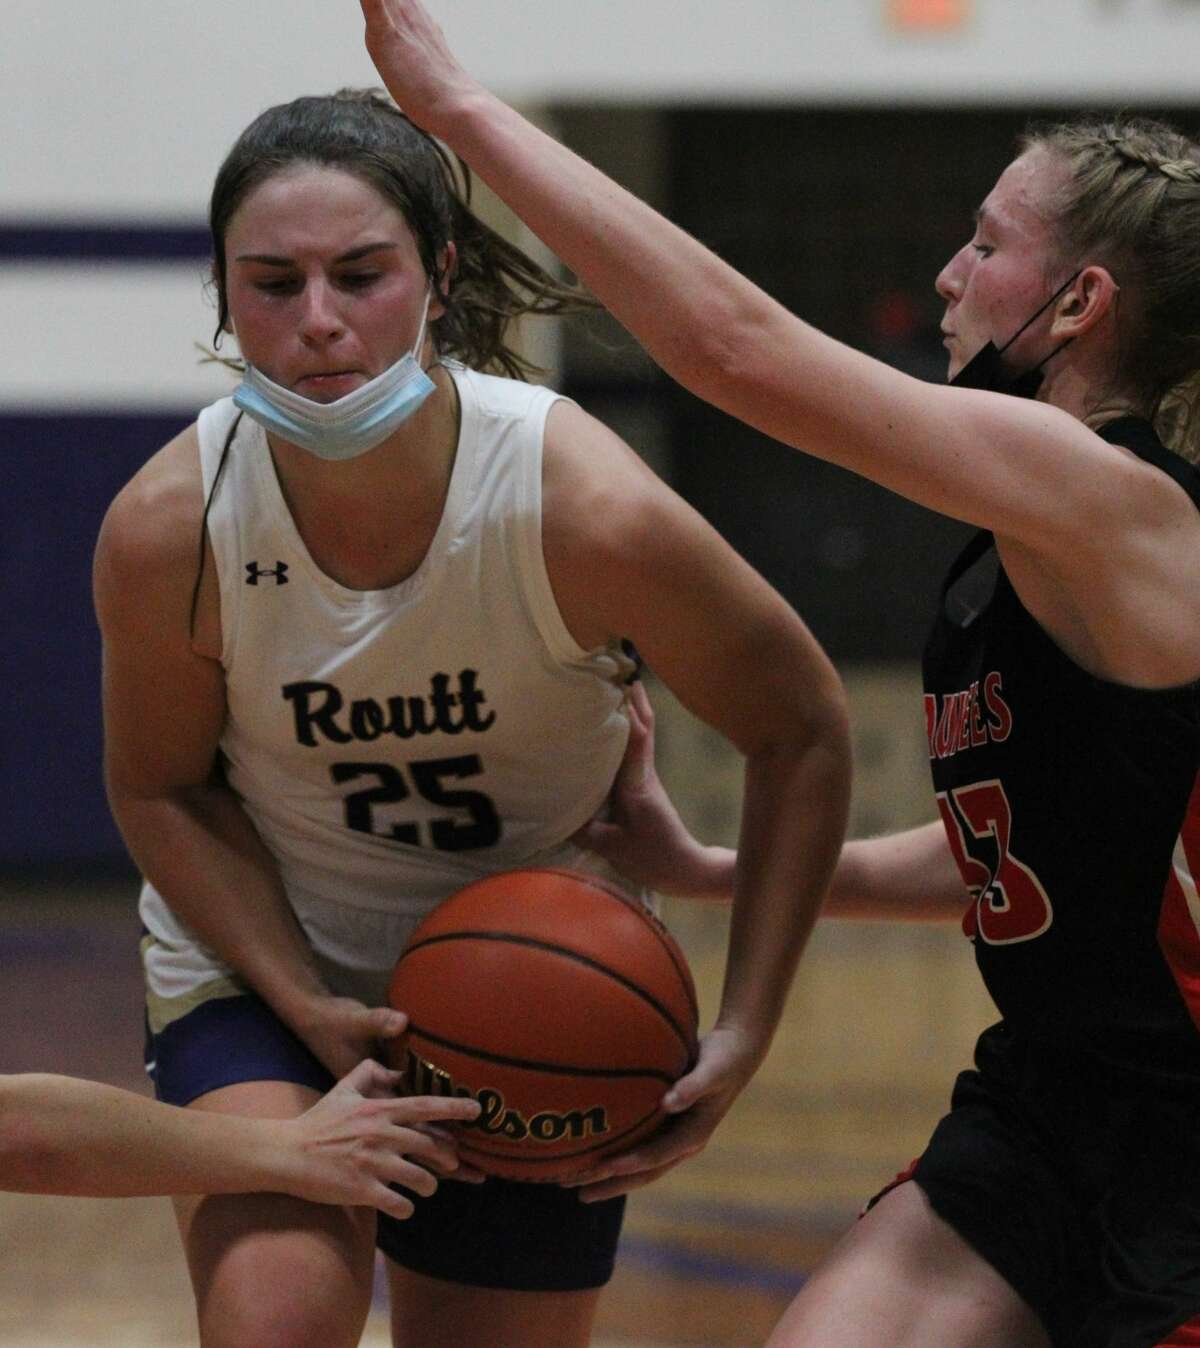 Routt's Addie Dobson drives to the basket during a game against Pittsfield in the season opener at Routt last week.